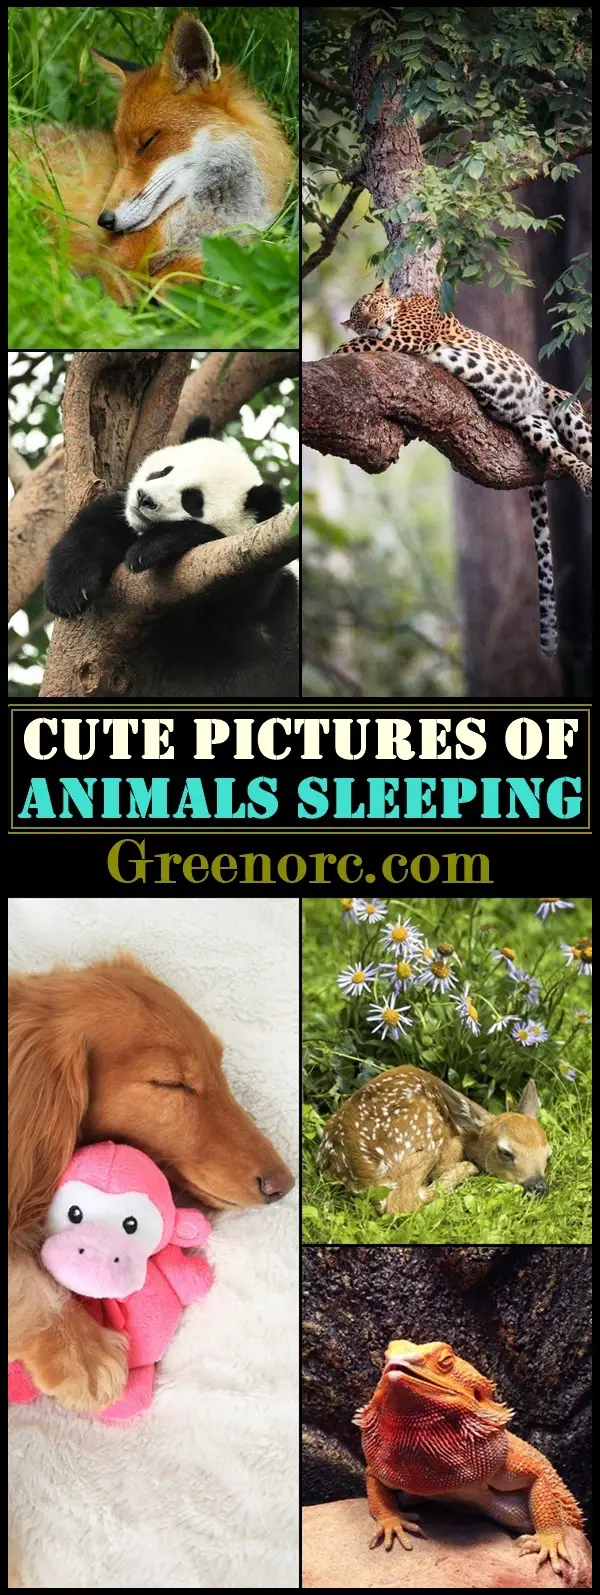 Cute Pictures of Animals Sleeping